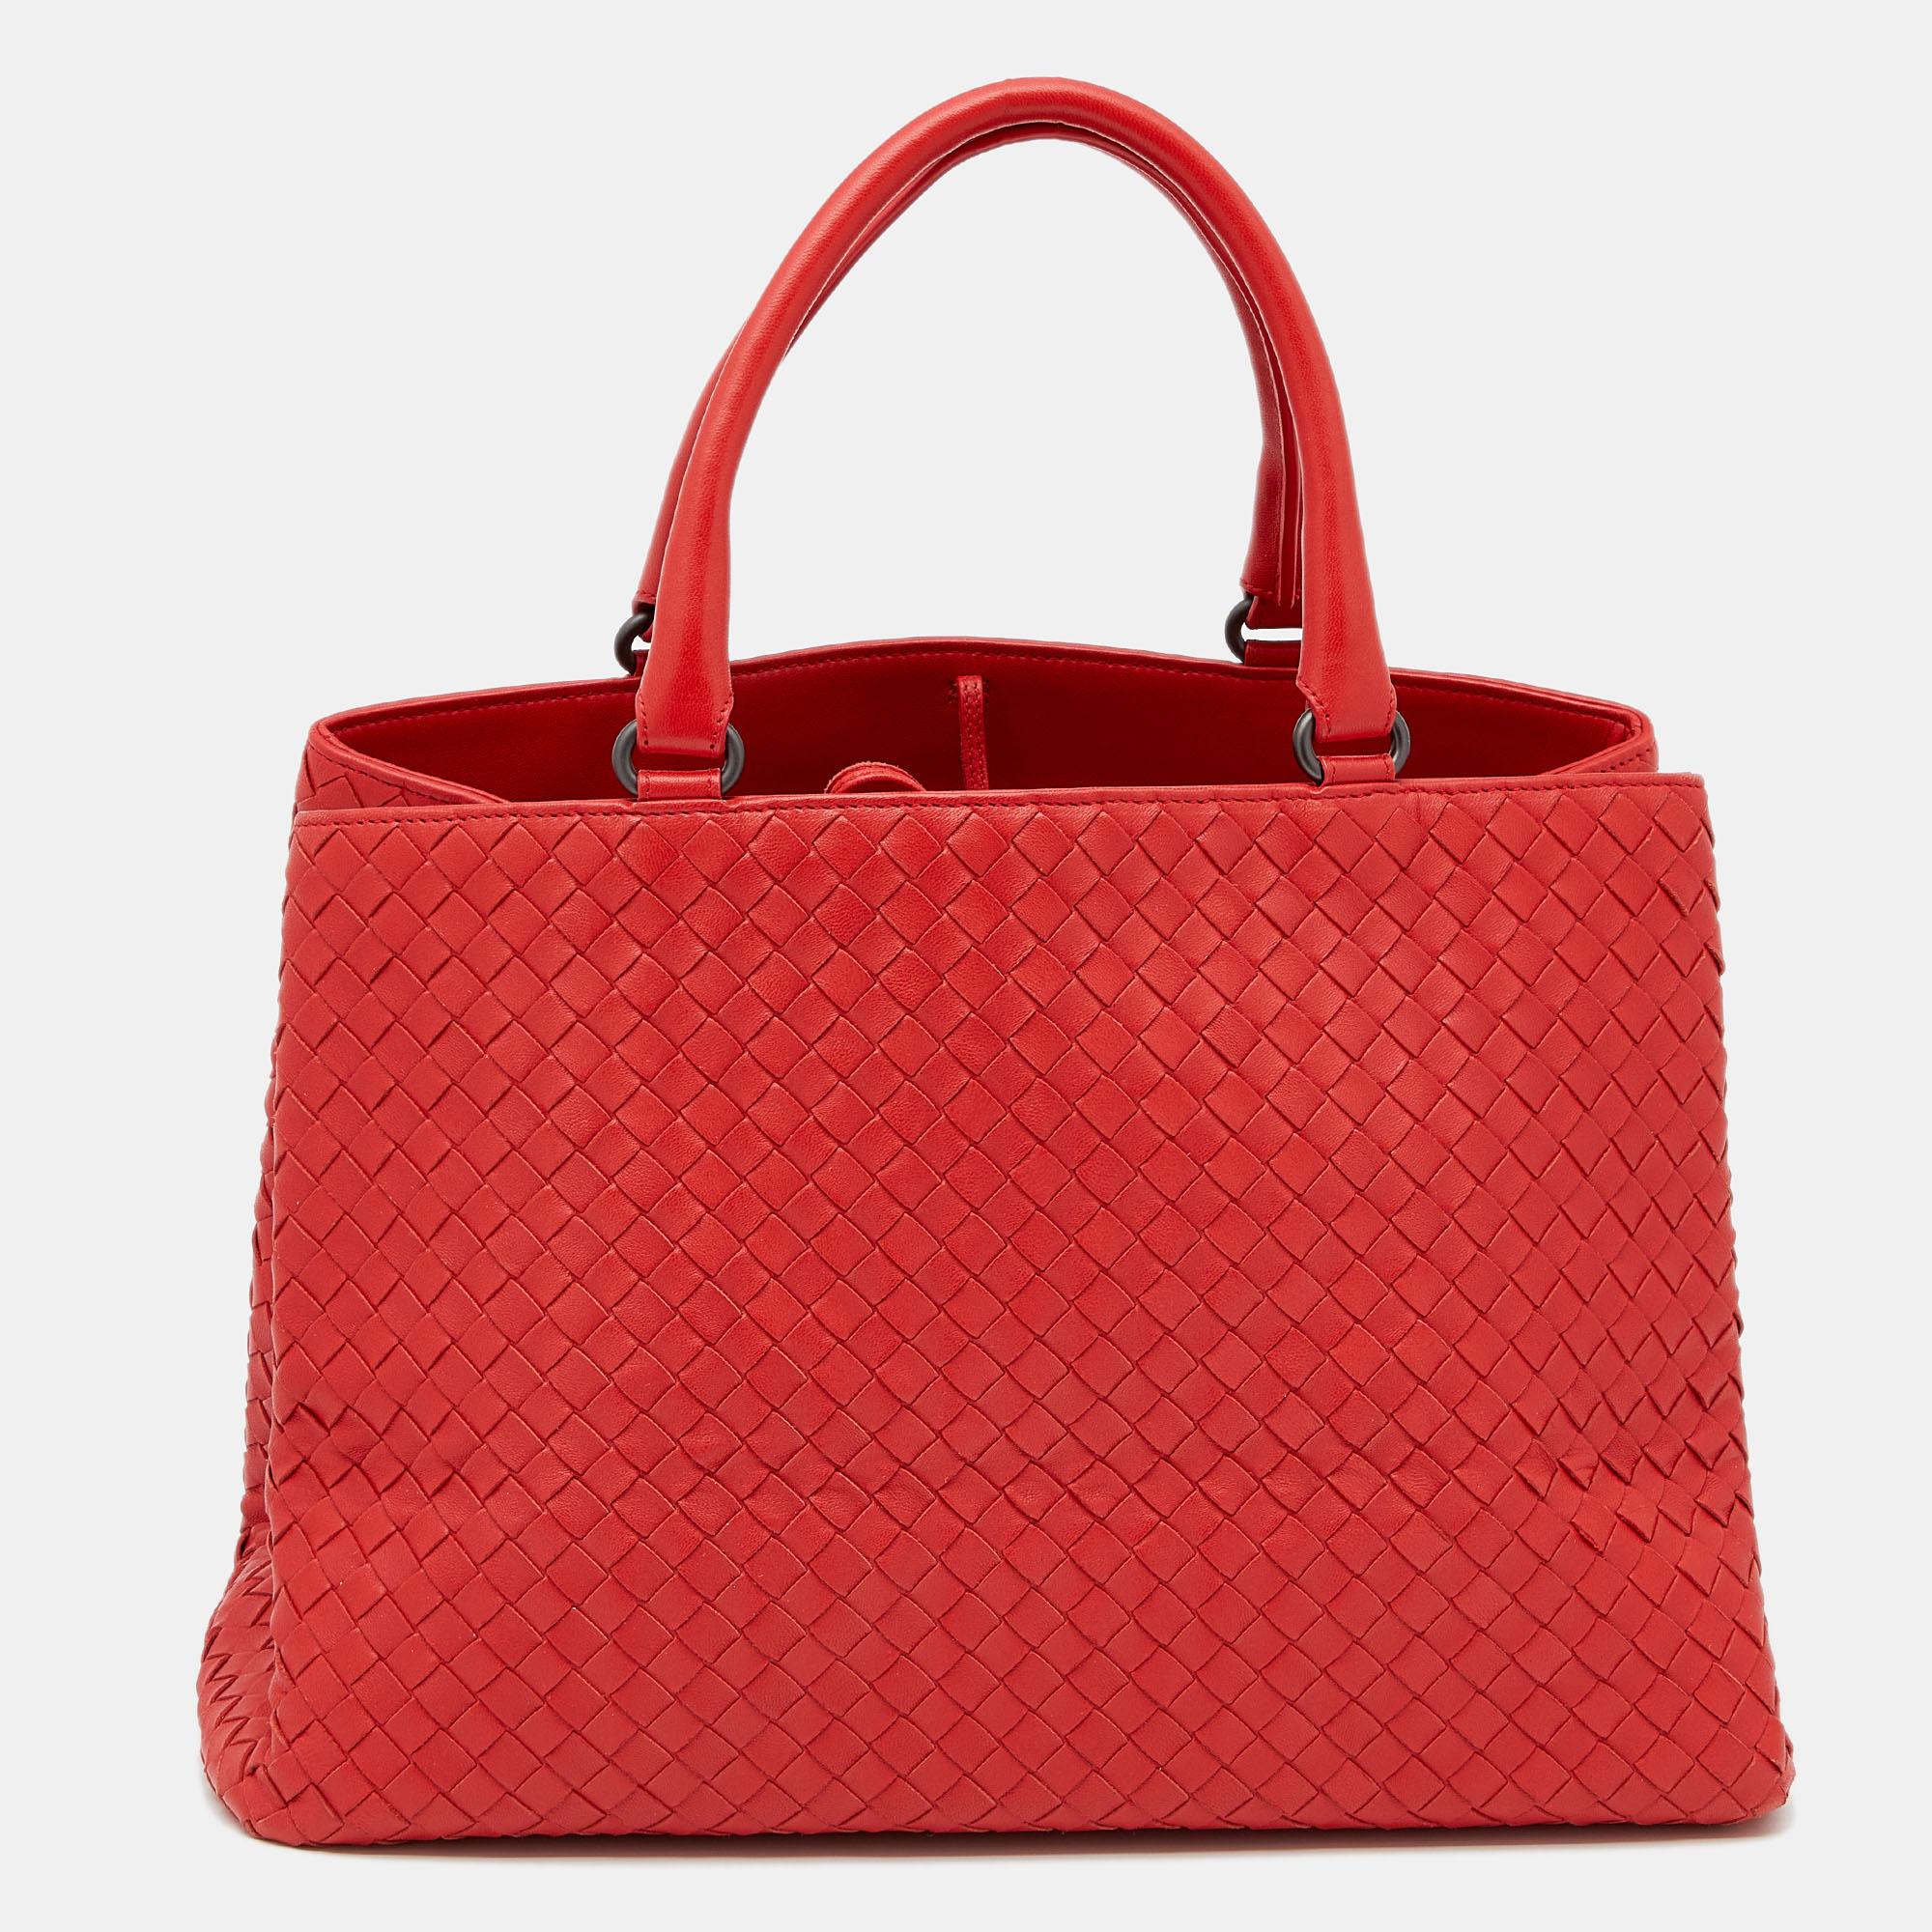 This Bottega Veneta tote is a timeless piece that can last you season after season. This bag is made of Intrecciato leather and will suit all your needs. It has a red shade, black-tone hardware, dual handles, and a suede-lined interior.

Includes: